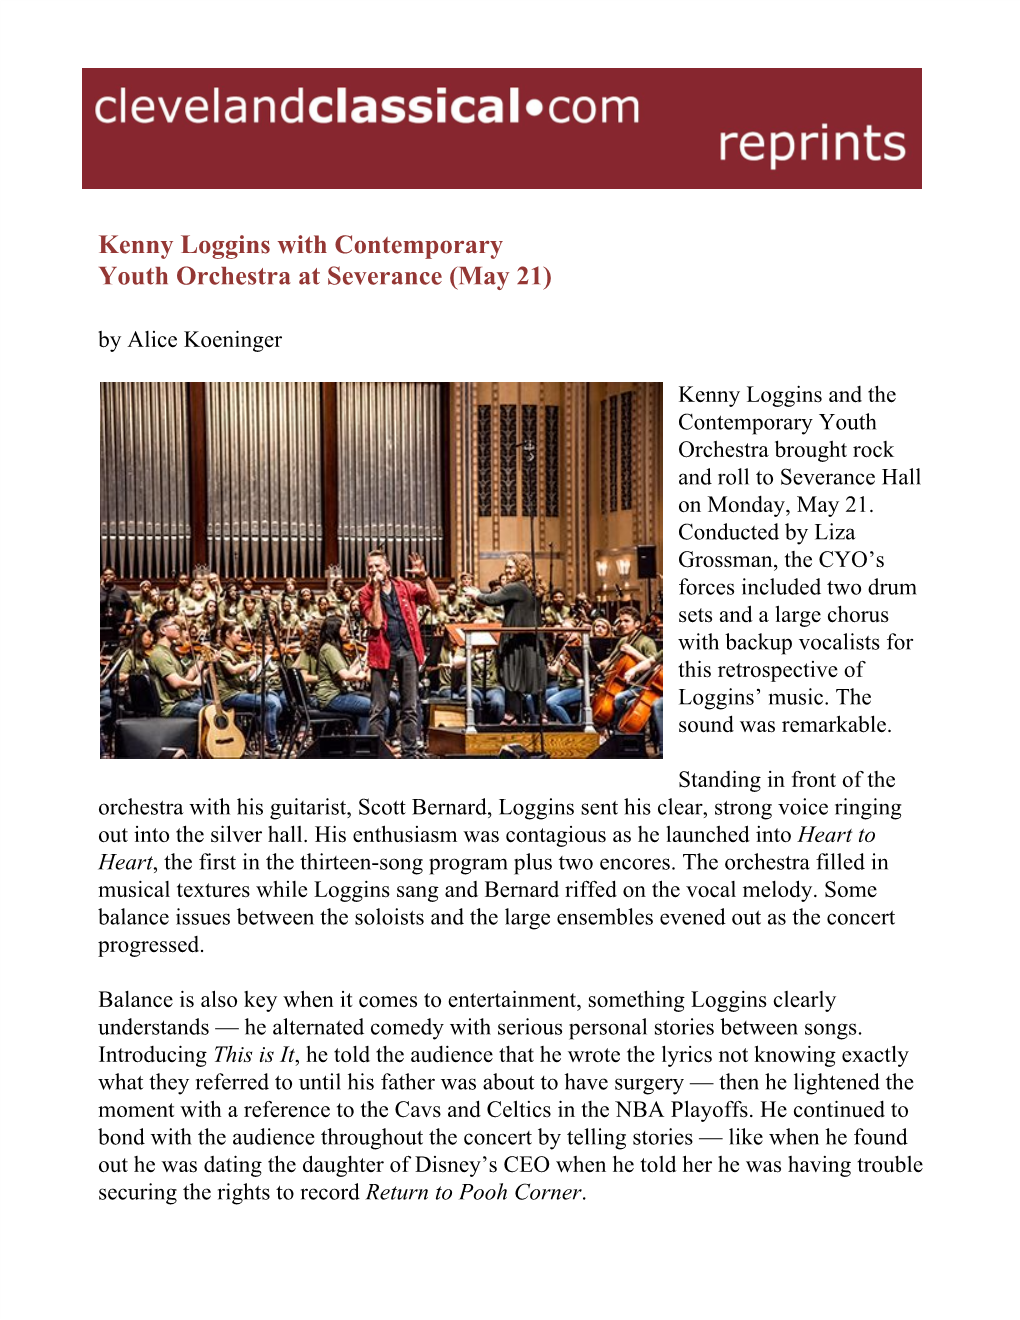 Kenny Loggins with Contemporary Youth Orchestra at Severance (May 21) by Alice Koeninger